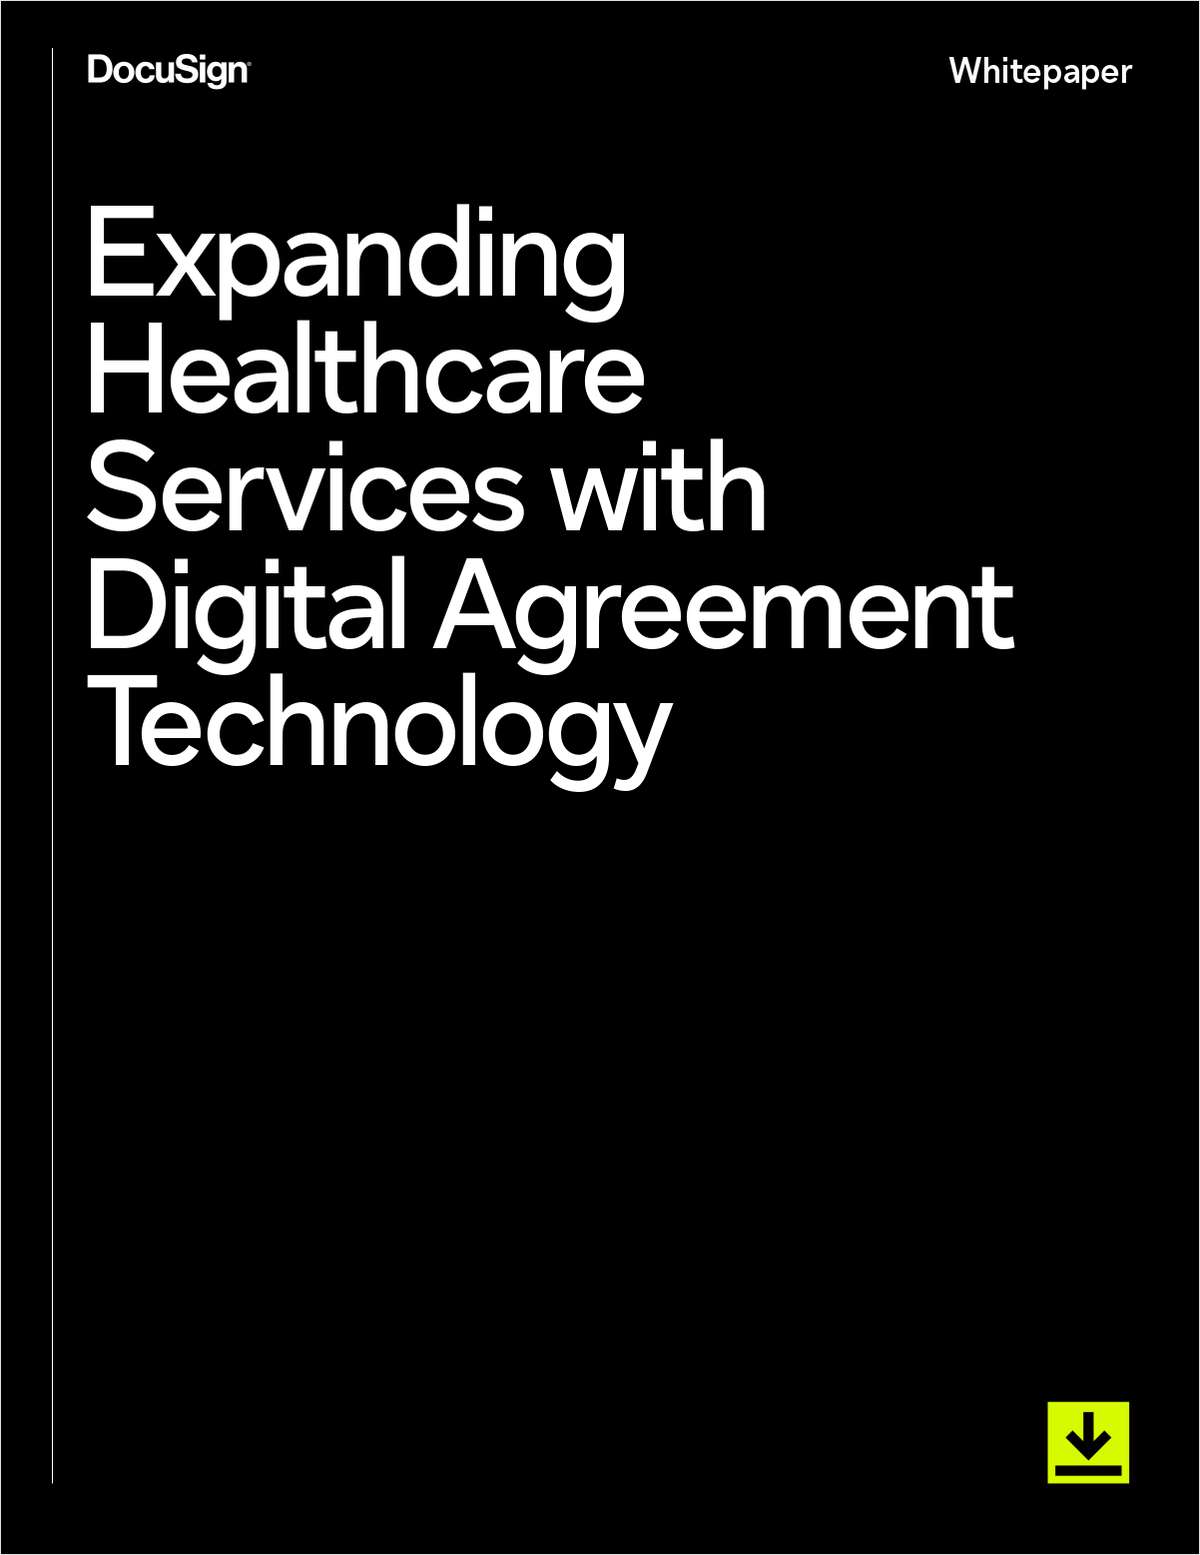 Expanding Healthcare Services with Digital Agreement Technology